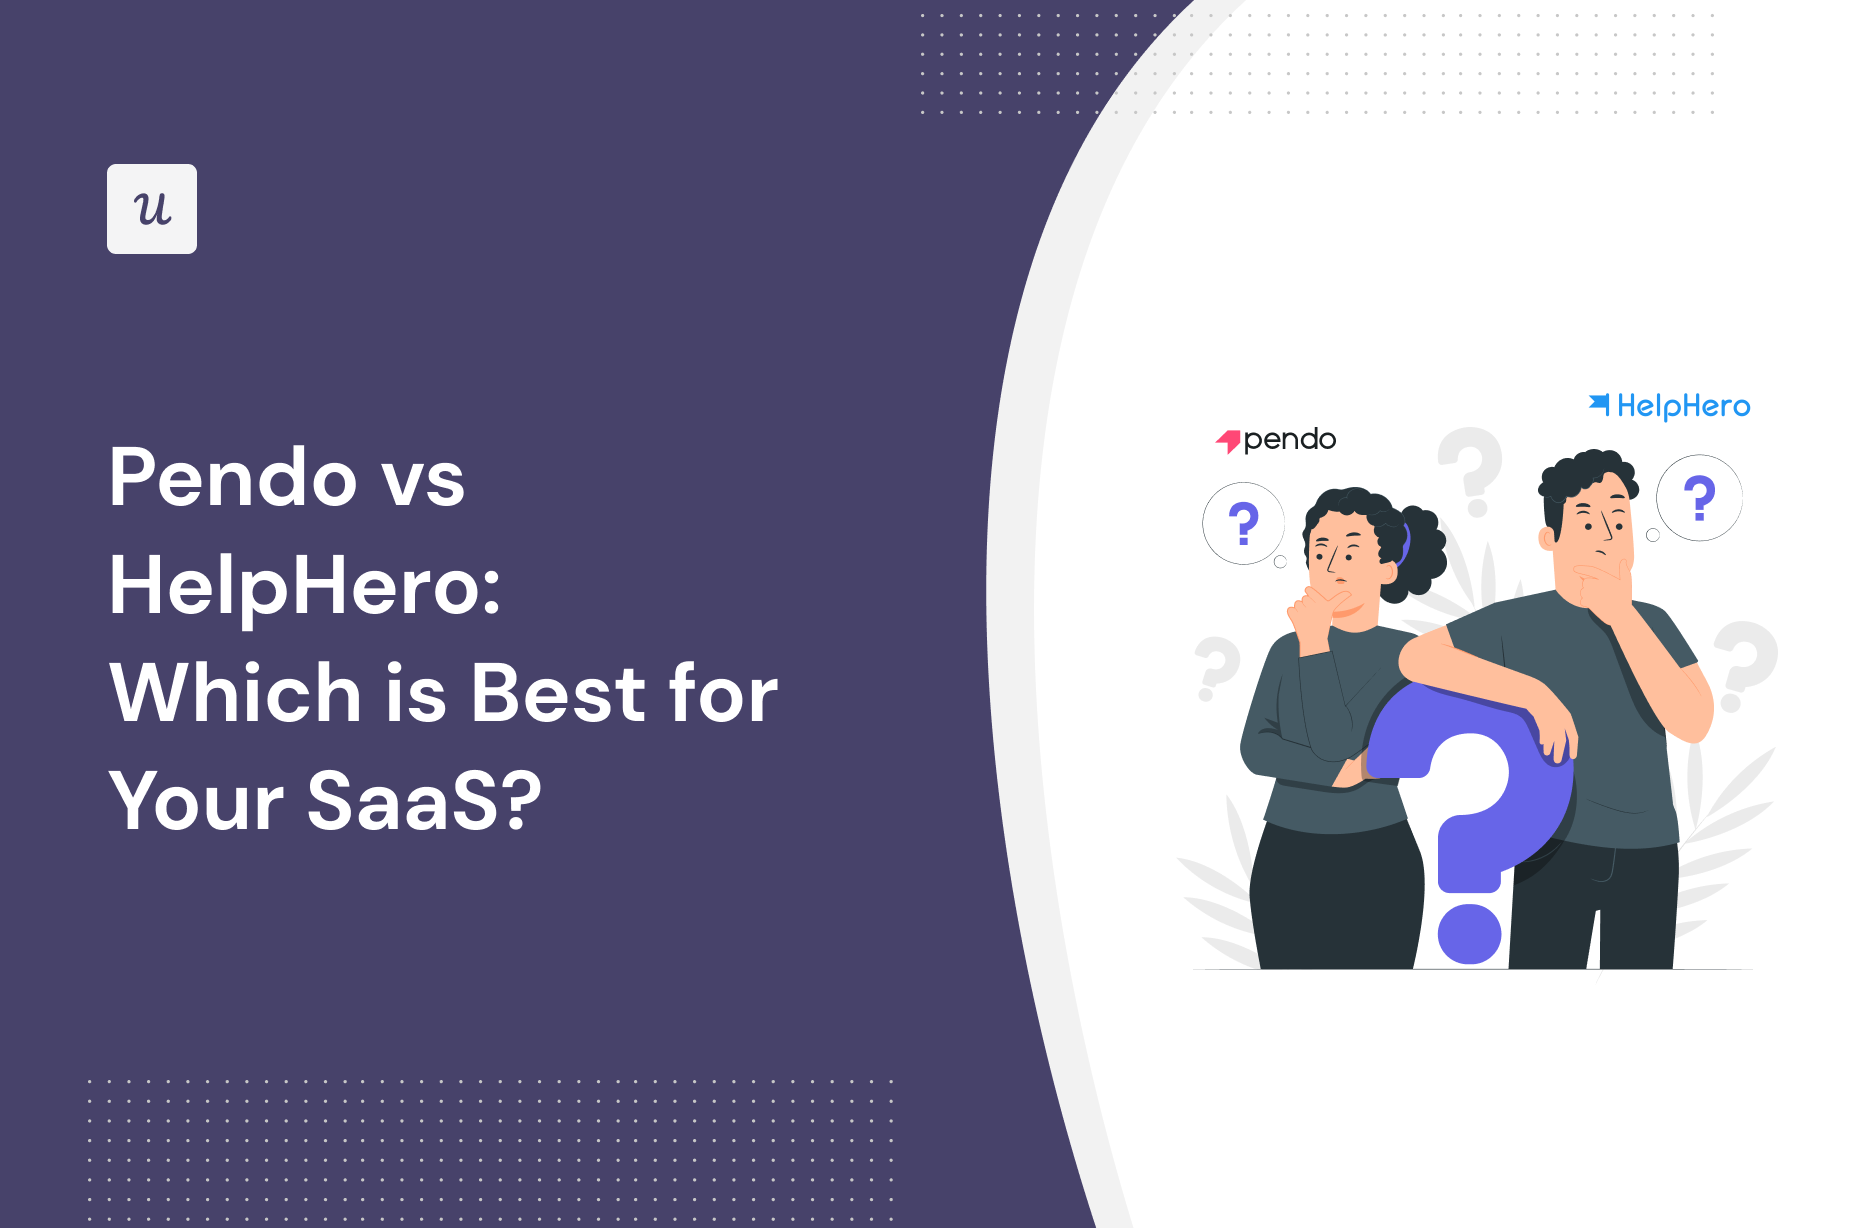 Pendo vs HelpHero: Which is Best for Your SaaS?